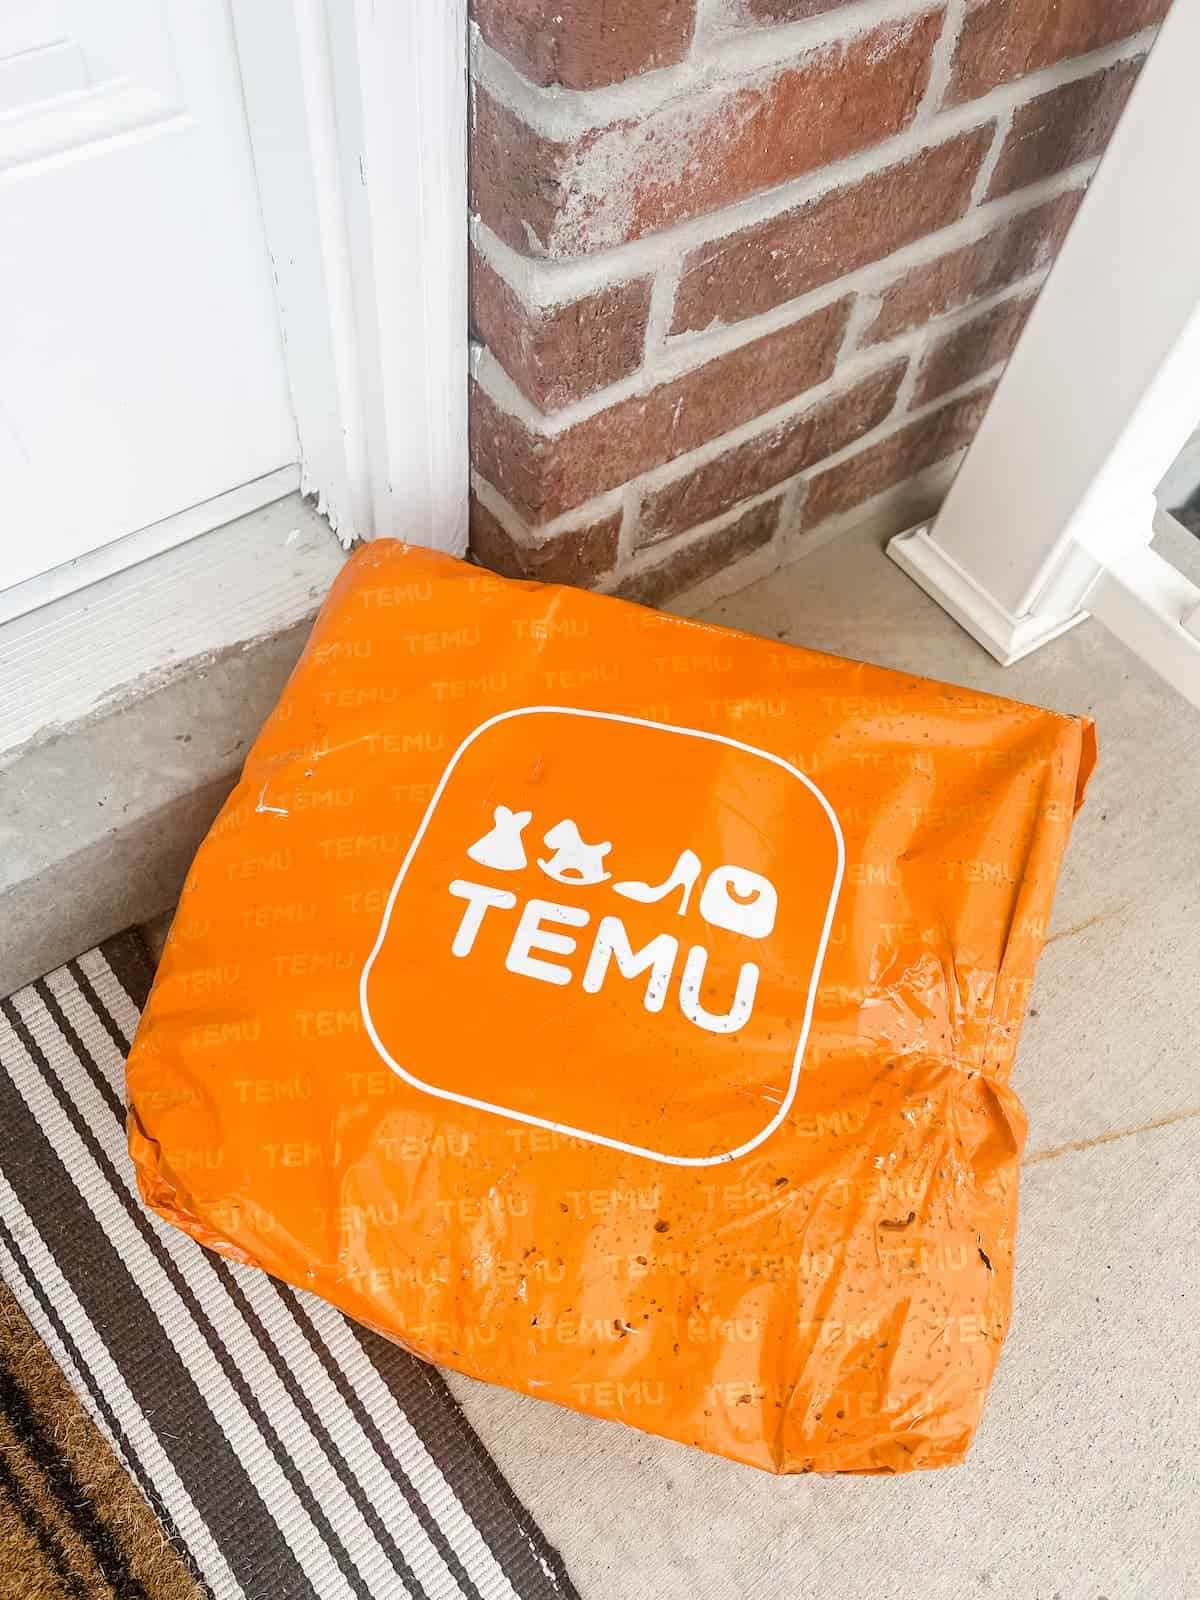 Temu Review: Is Temu Legit? (+ Real Product Pictures)